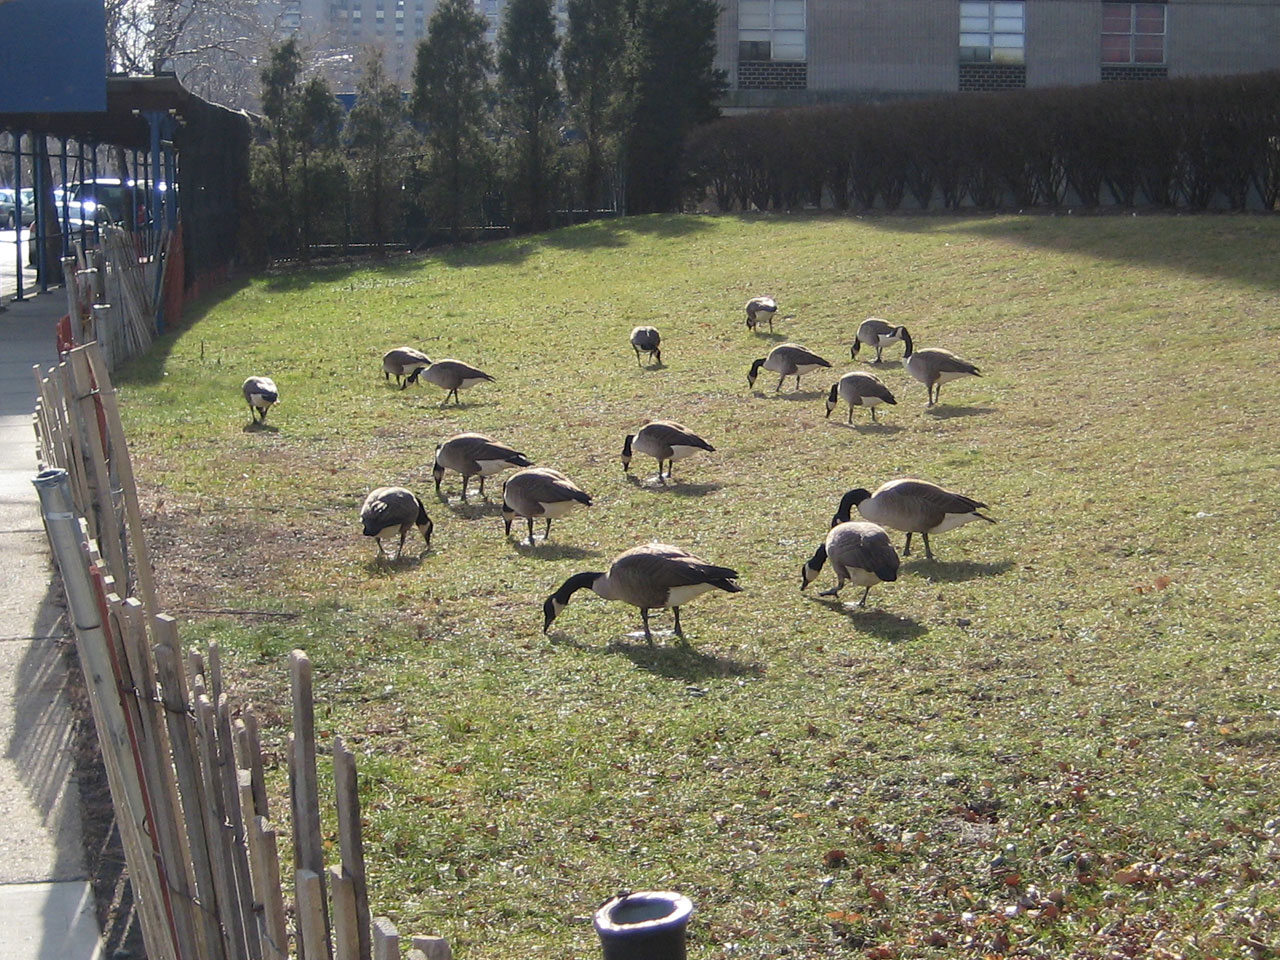 Canadian Geese